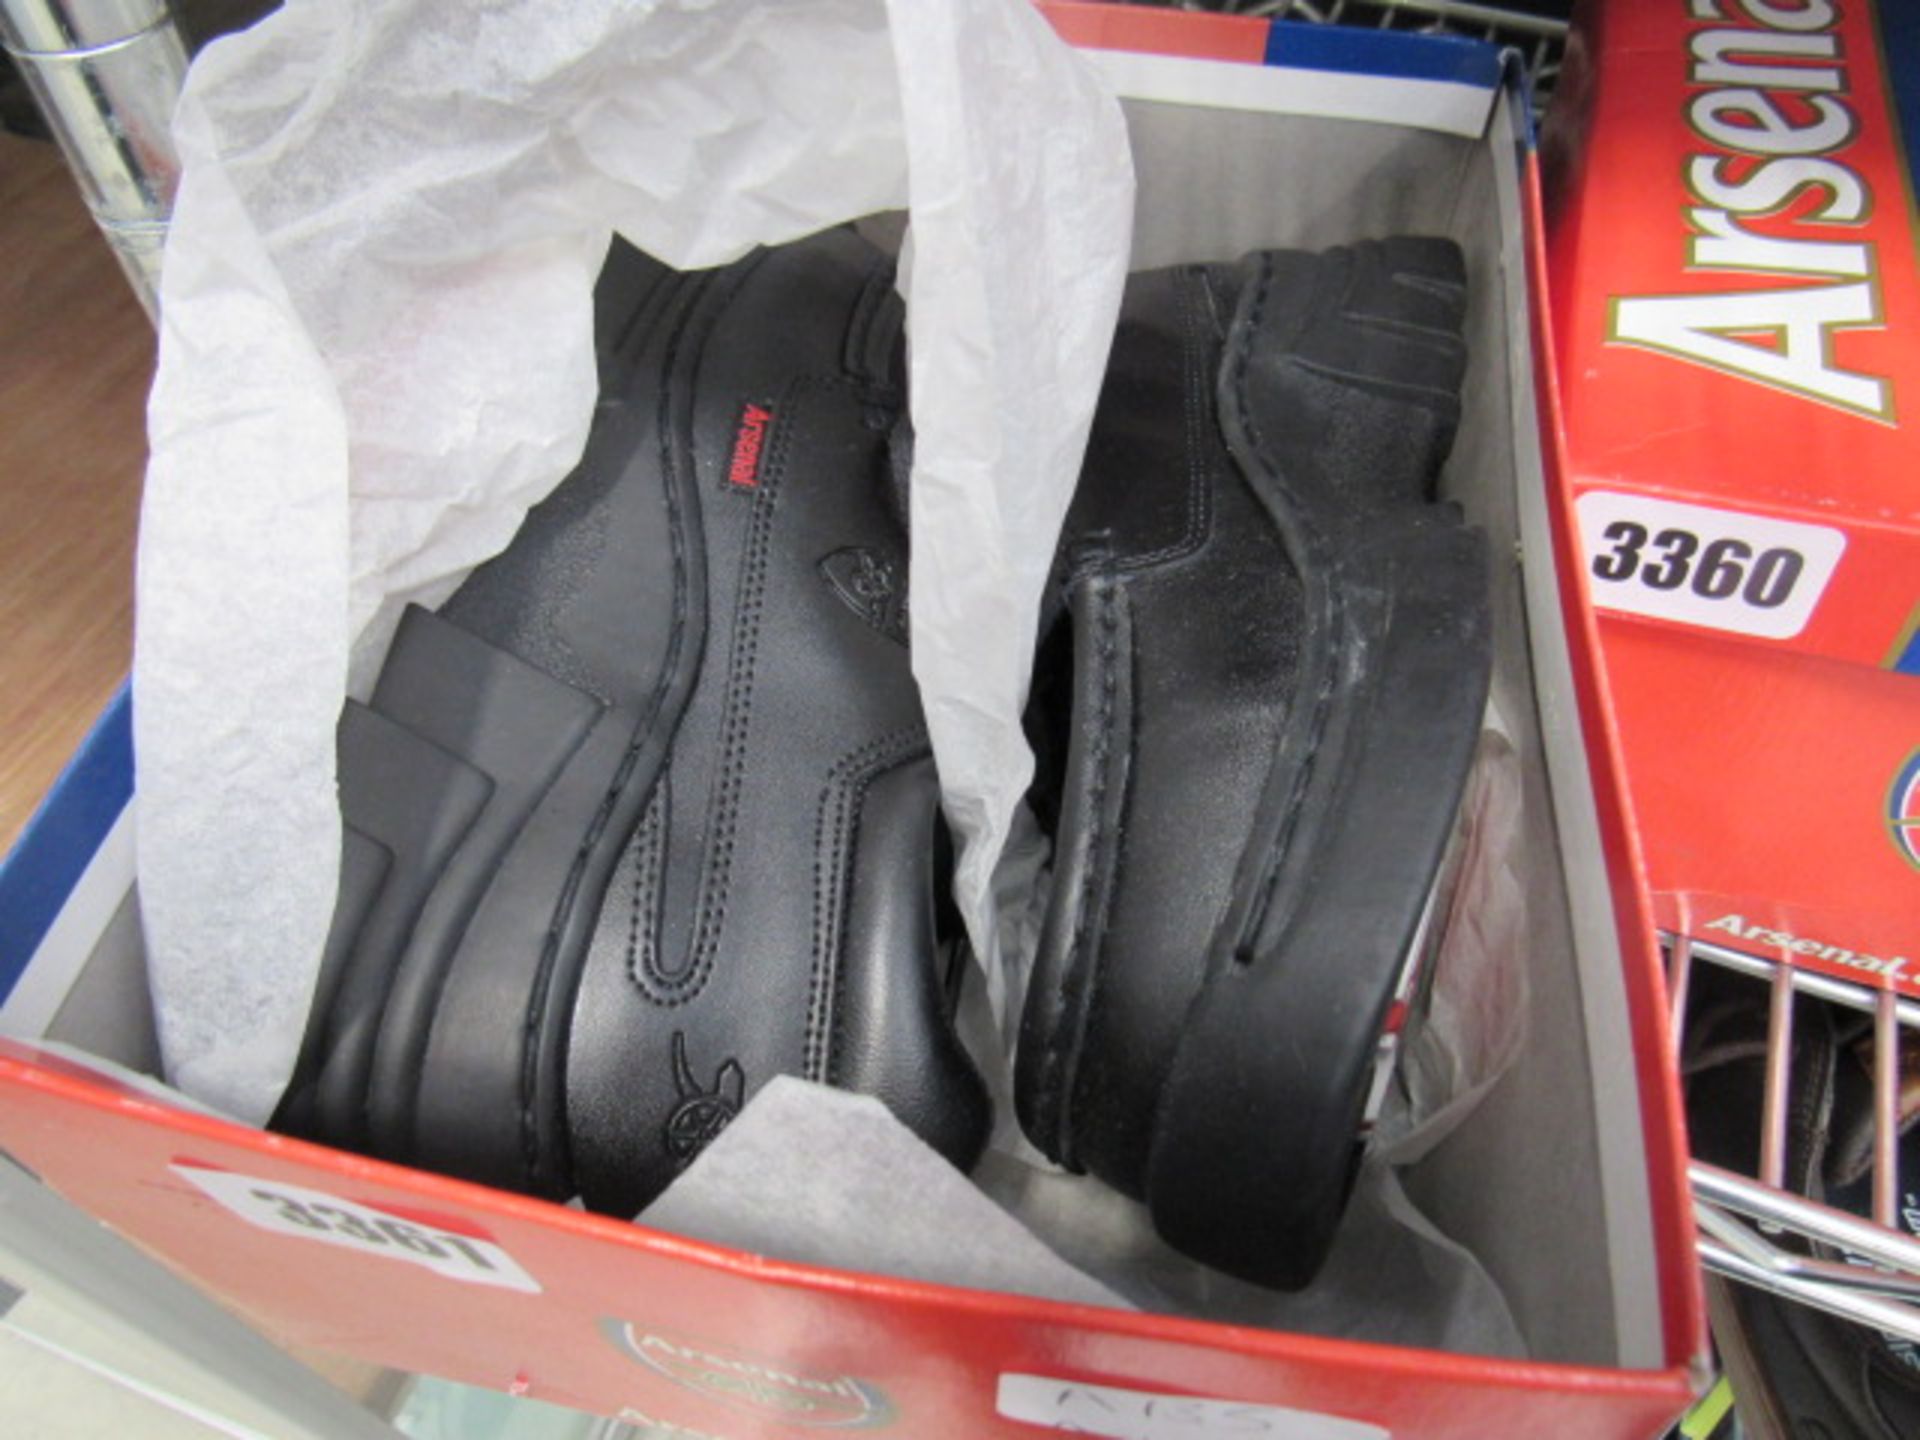 Boxed pair of children's Arsenal school shoes